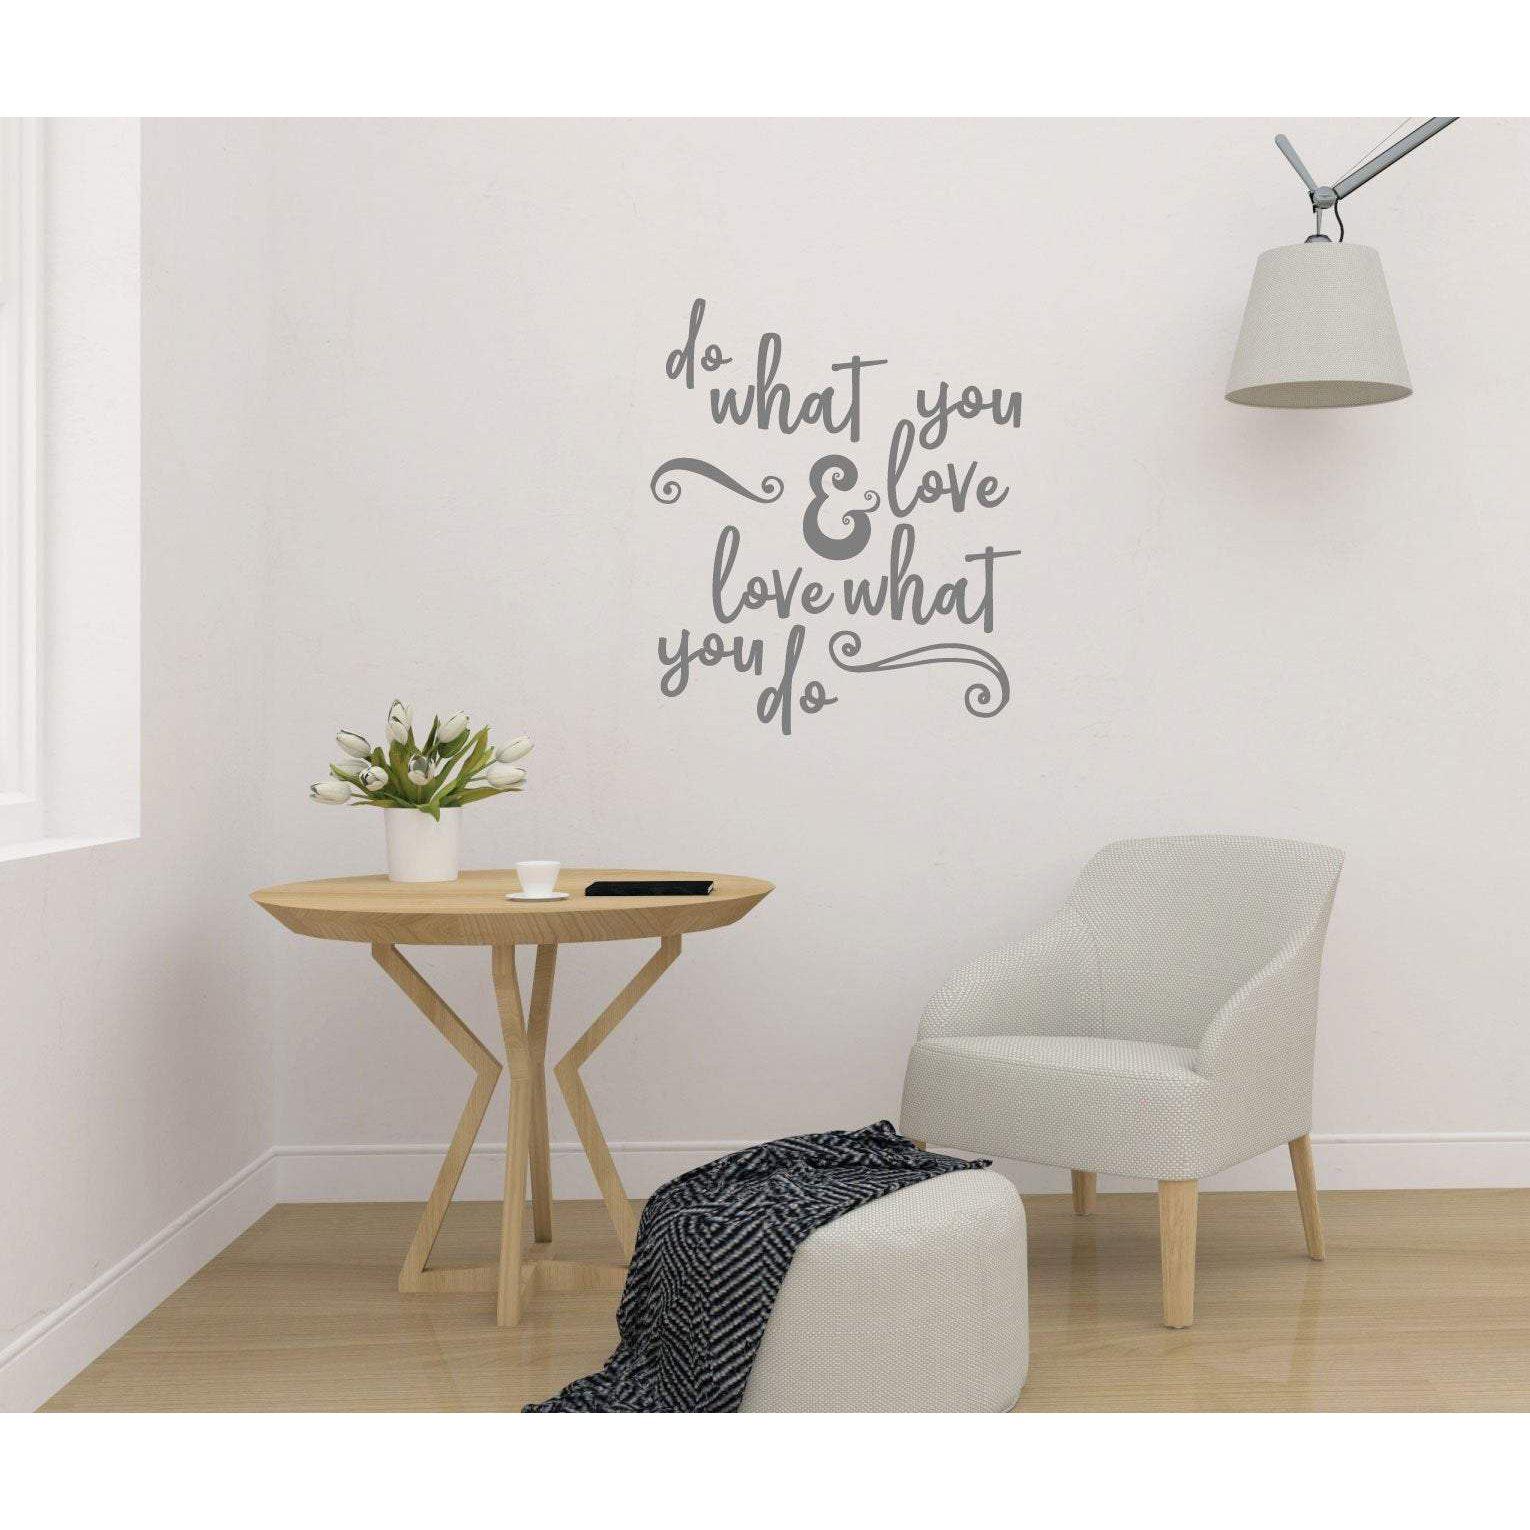 Wall Decal Quote, Do What You Love, Wall Sticker Quote, Wall Decal Quote, Motivational Wall Sticker, Positive Wall Decal, Wall Art, Slogan